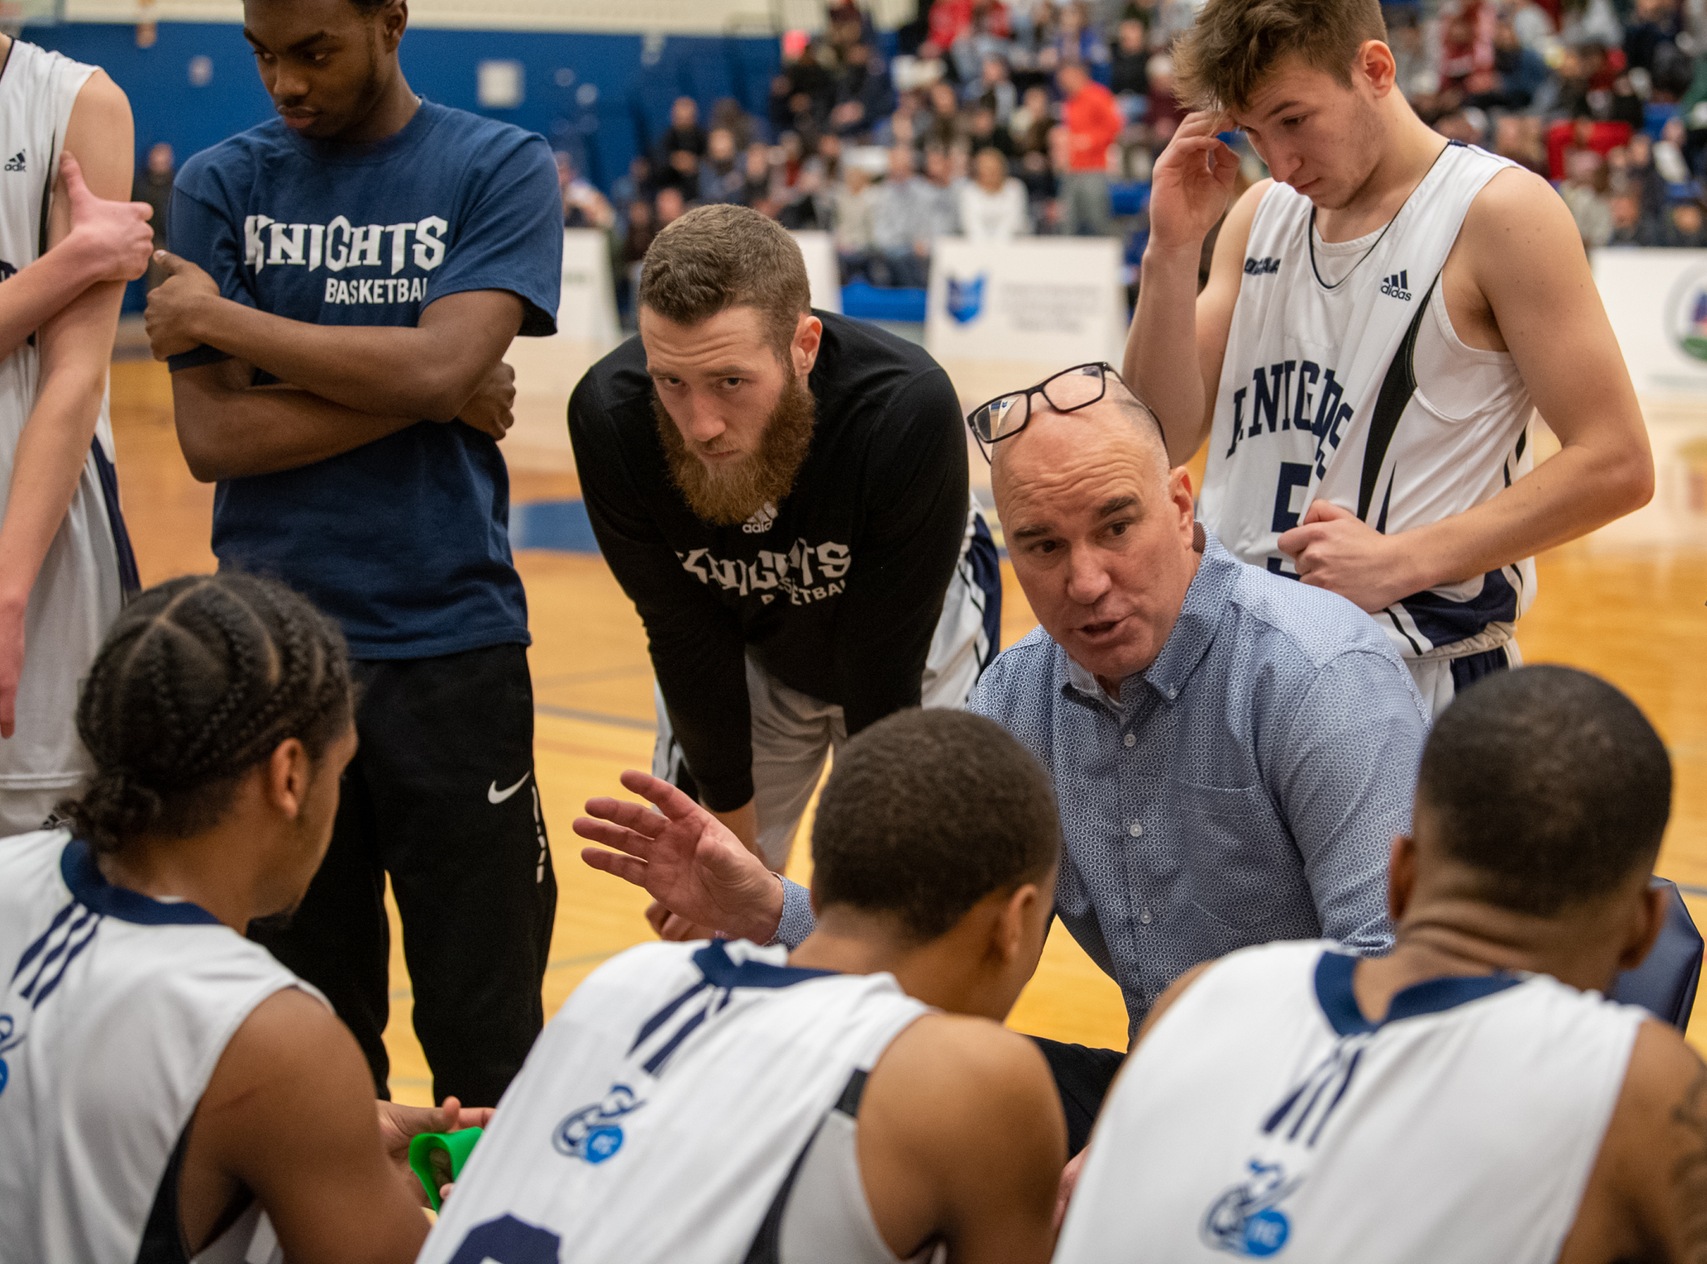 Men’s Basketball Falls to Humber but Earn Much Needed OT Win over Falcons